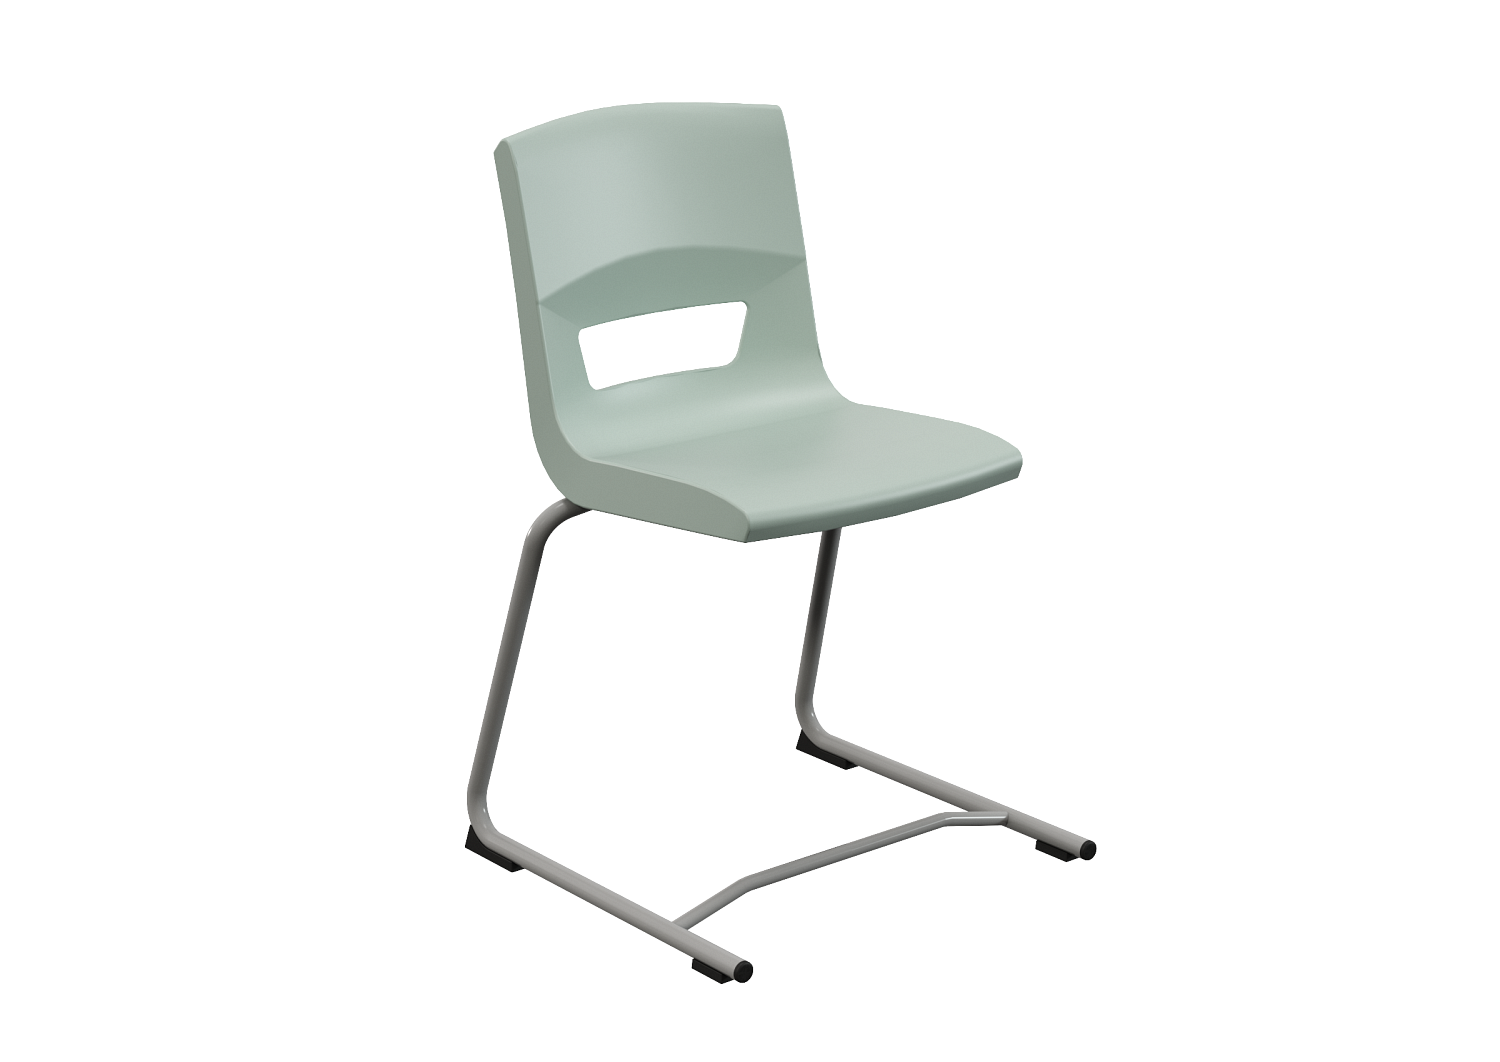 Postura reverse cantilevedr chair for classrom and kitchen haze jade